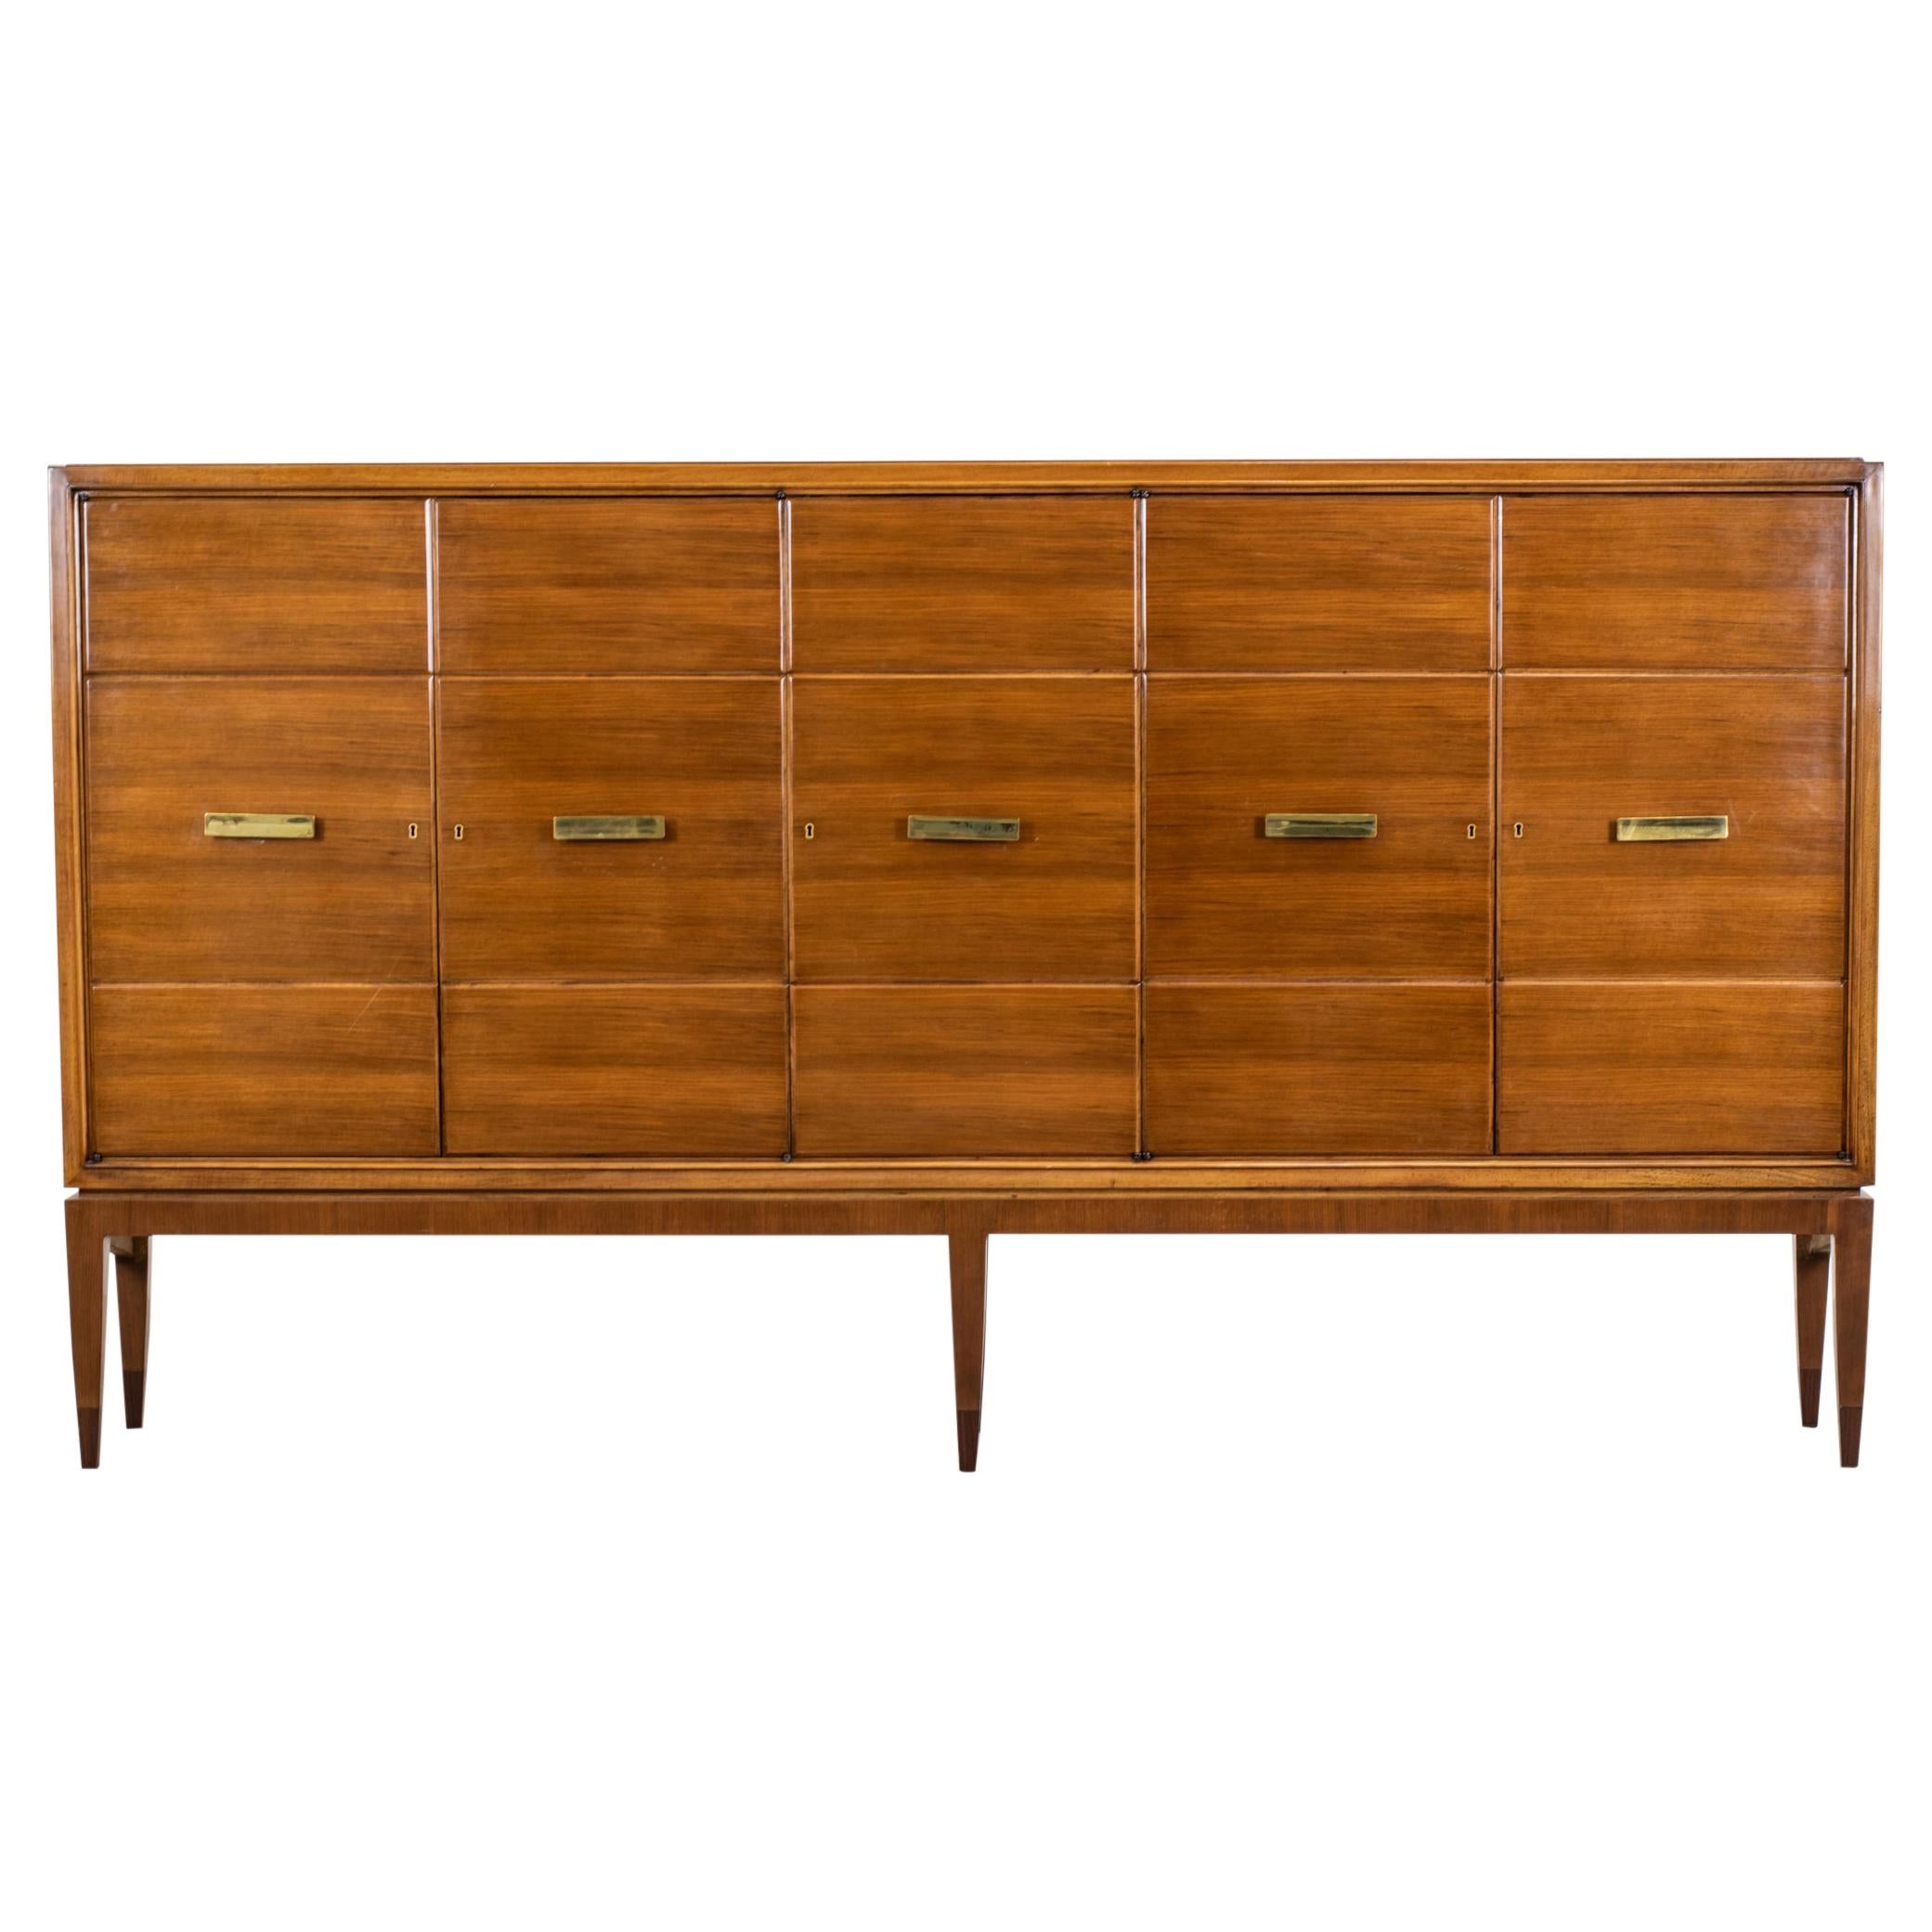 Gio Ponti Large Sideboard in Walnut and Brass for Singer & Sons 1950s Italy 